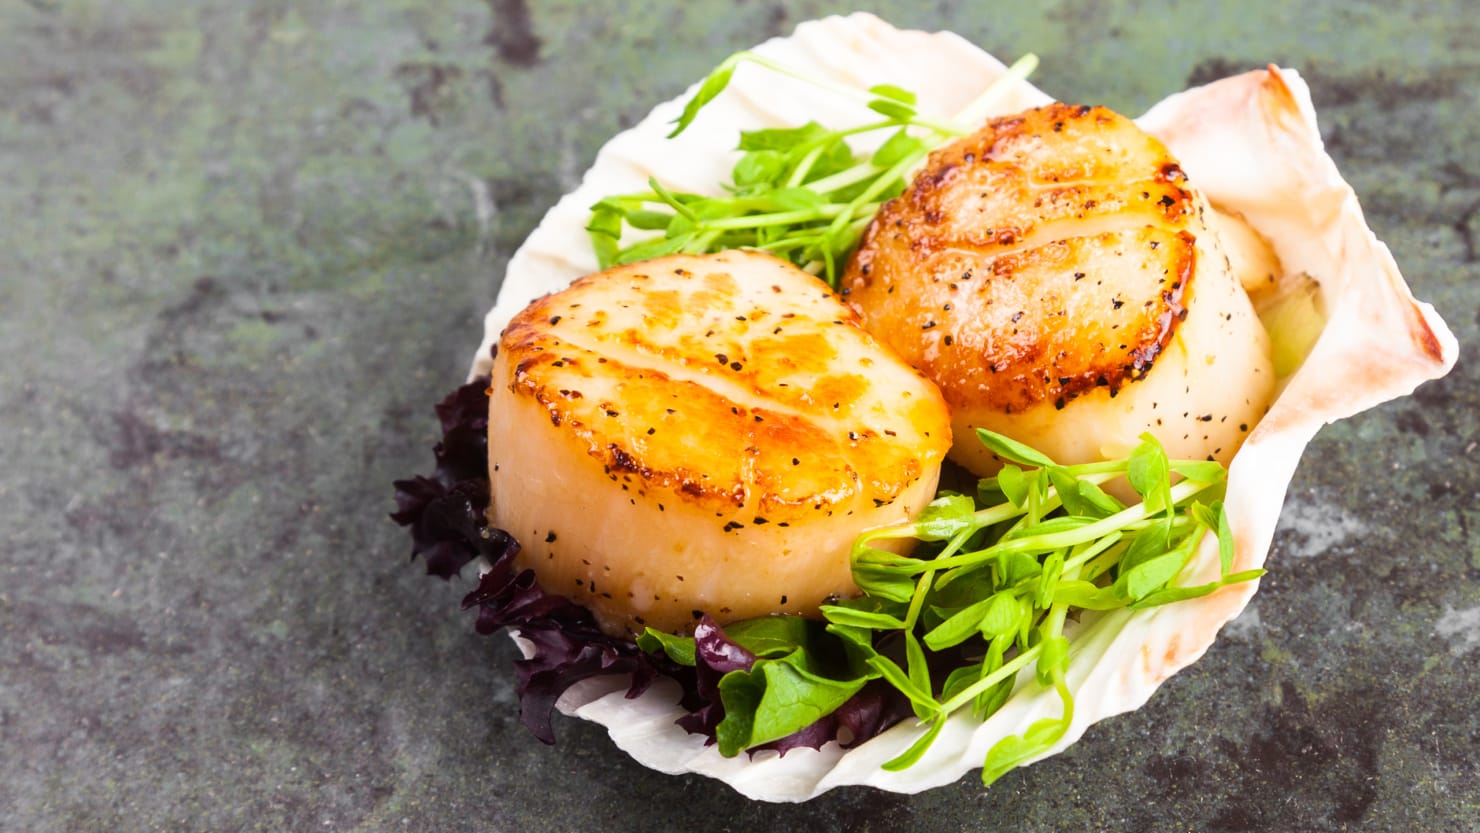 Forget Lobster The Scallop Is the Real Seafood King Xxx Pic Hd